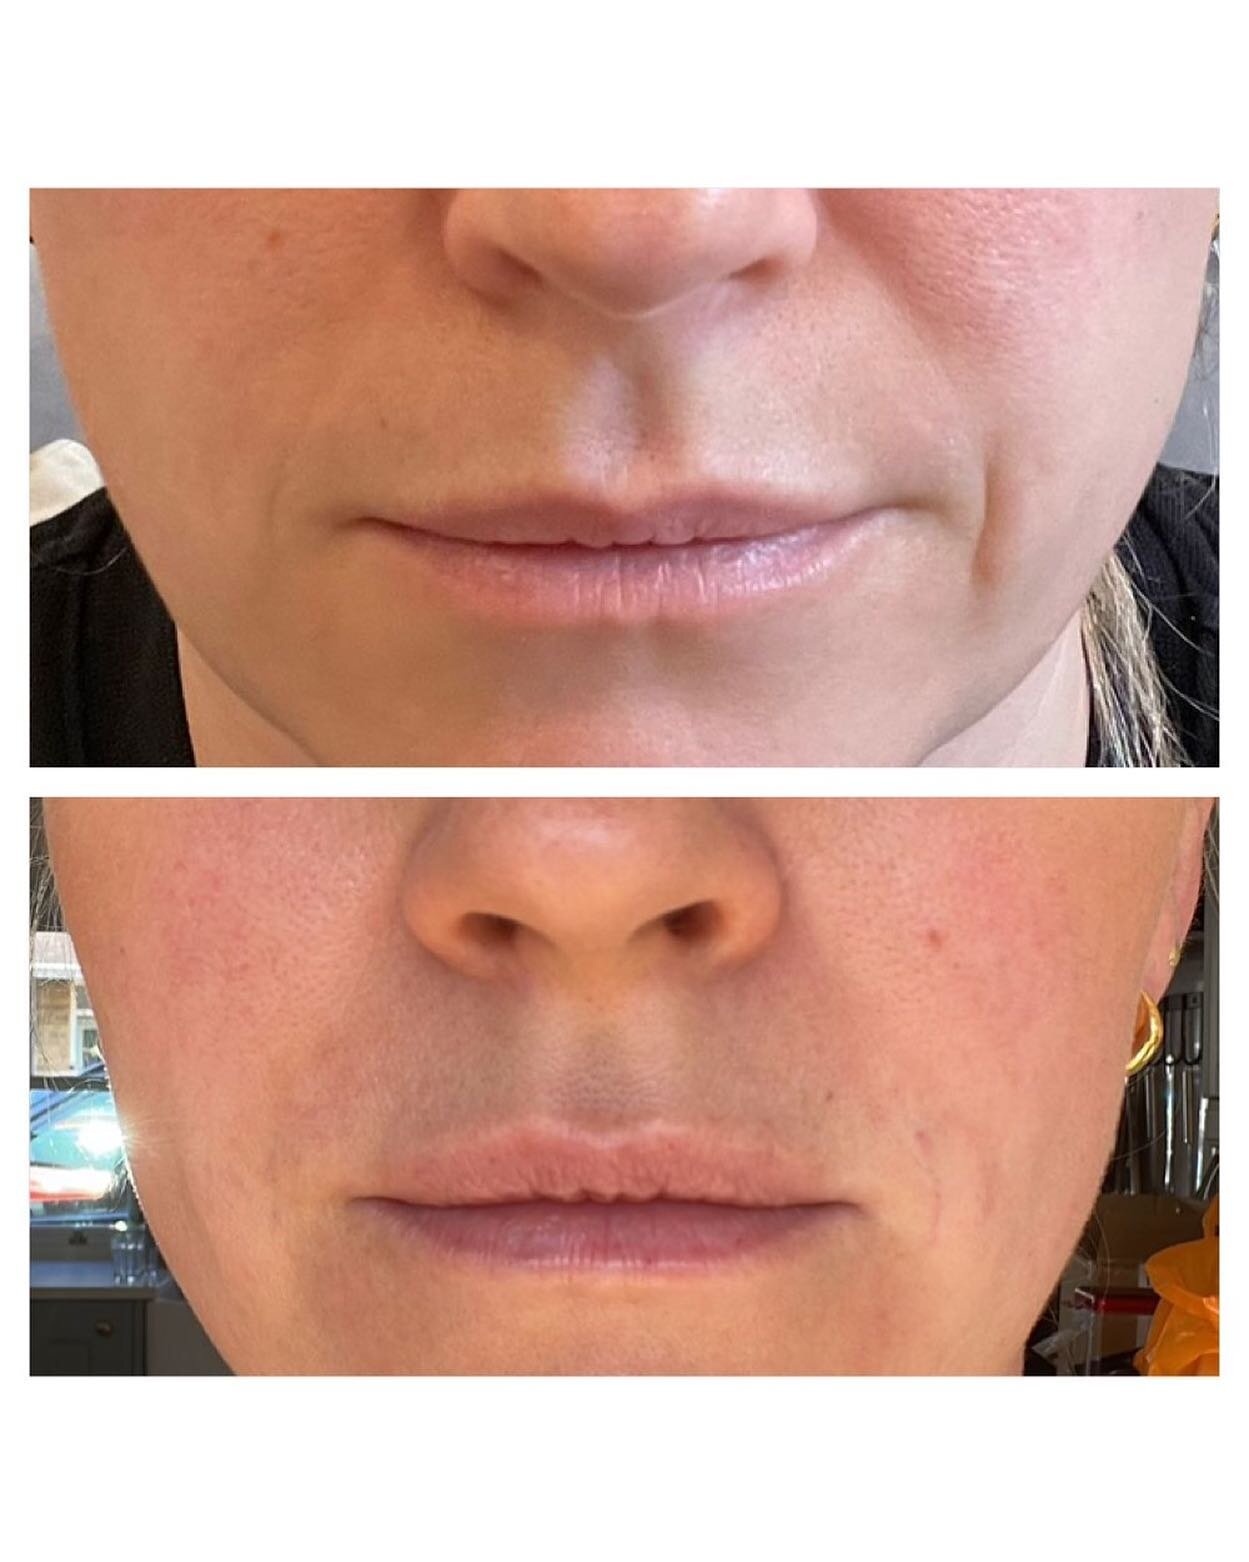 The subtle use of premium dermal fillers can give a natural but effective outcome. 

We used our favourite @teosyal fillers here to freshen up the nasolabial/marionette areas and lips. 

#lipfiller #dermalfillers #skinrejuvenation #antiageing #teoxan